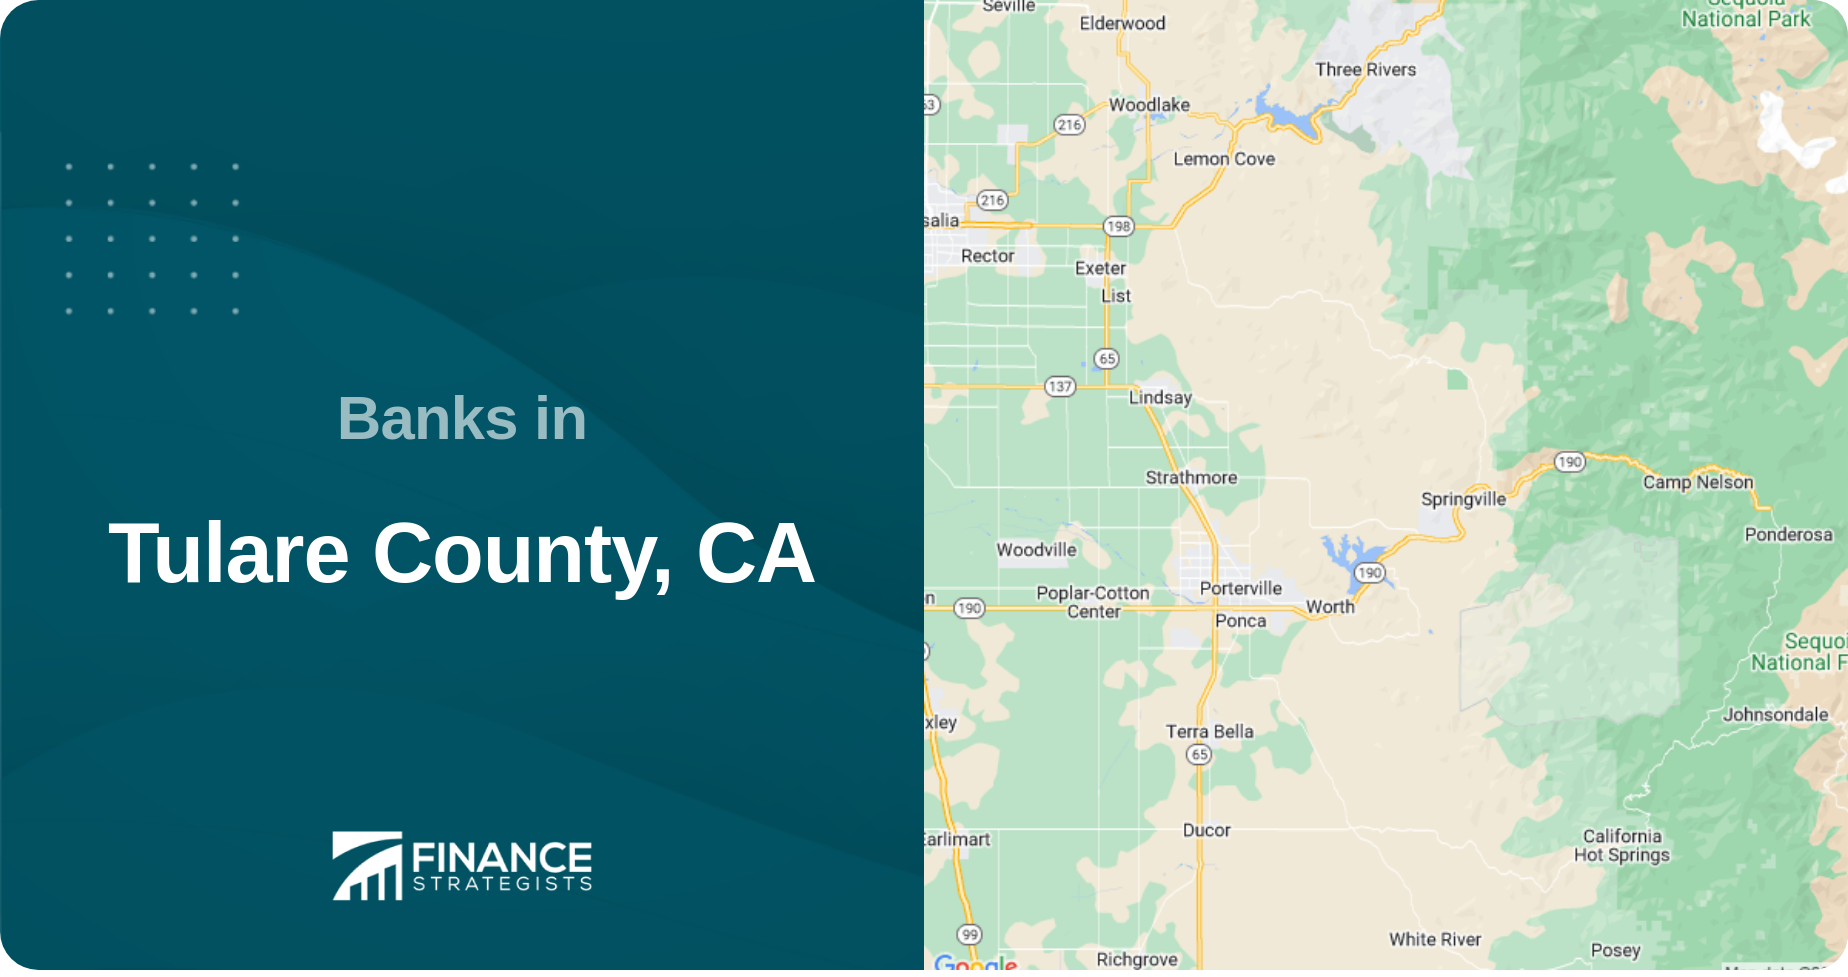 Banks in Tulare County, CA